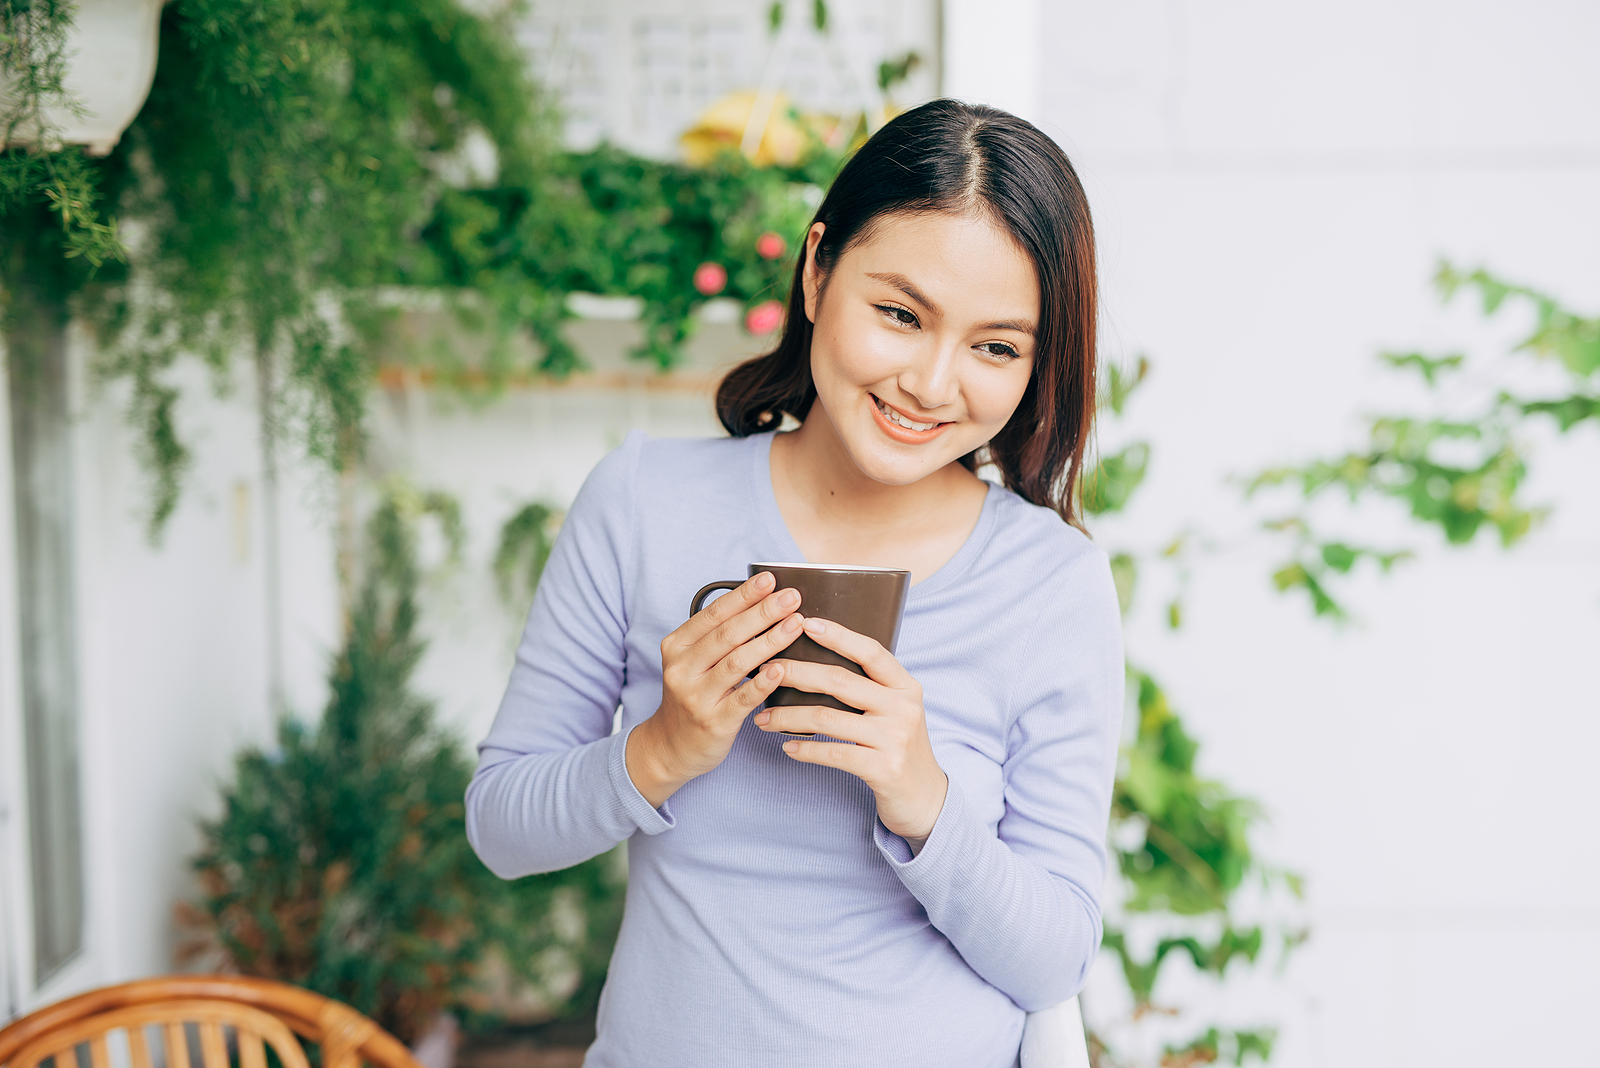 Image of an asian woman wearing a purple longsleeve shirt smiling and holding her coffee mug with both hands looking to the side. Behind her there are many plants on a white background.